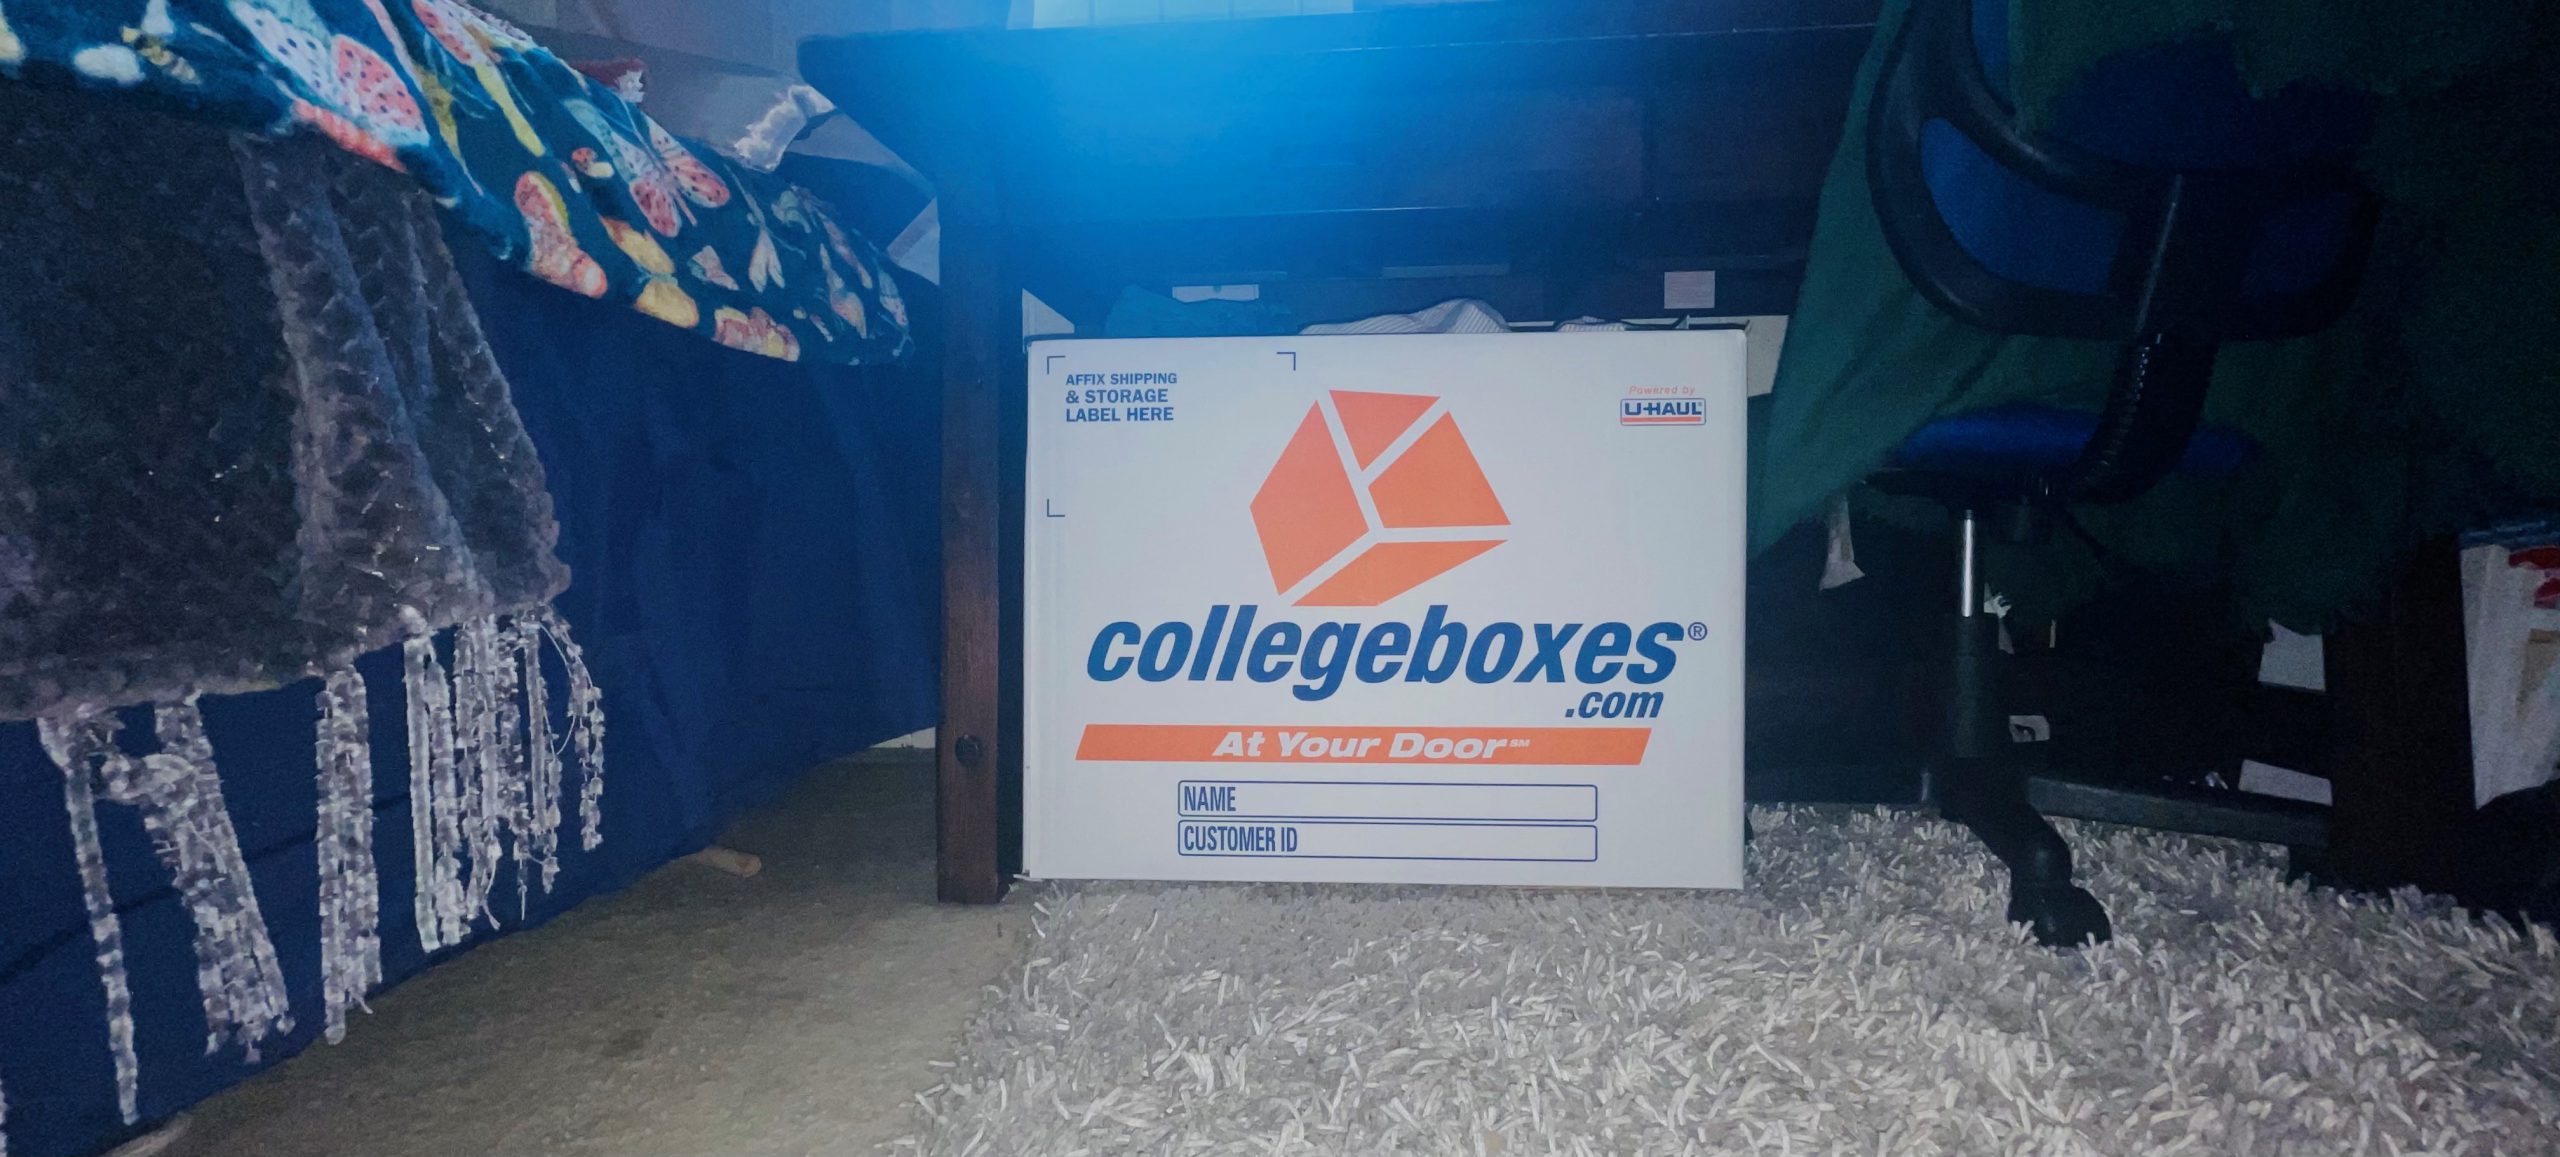 Collegeboxes Signature Box sitting on a rug under a wooden desk